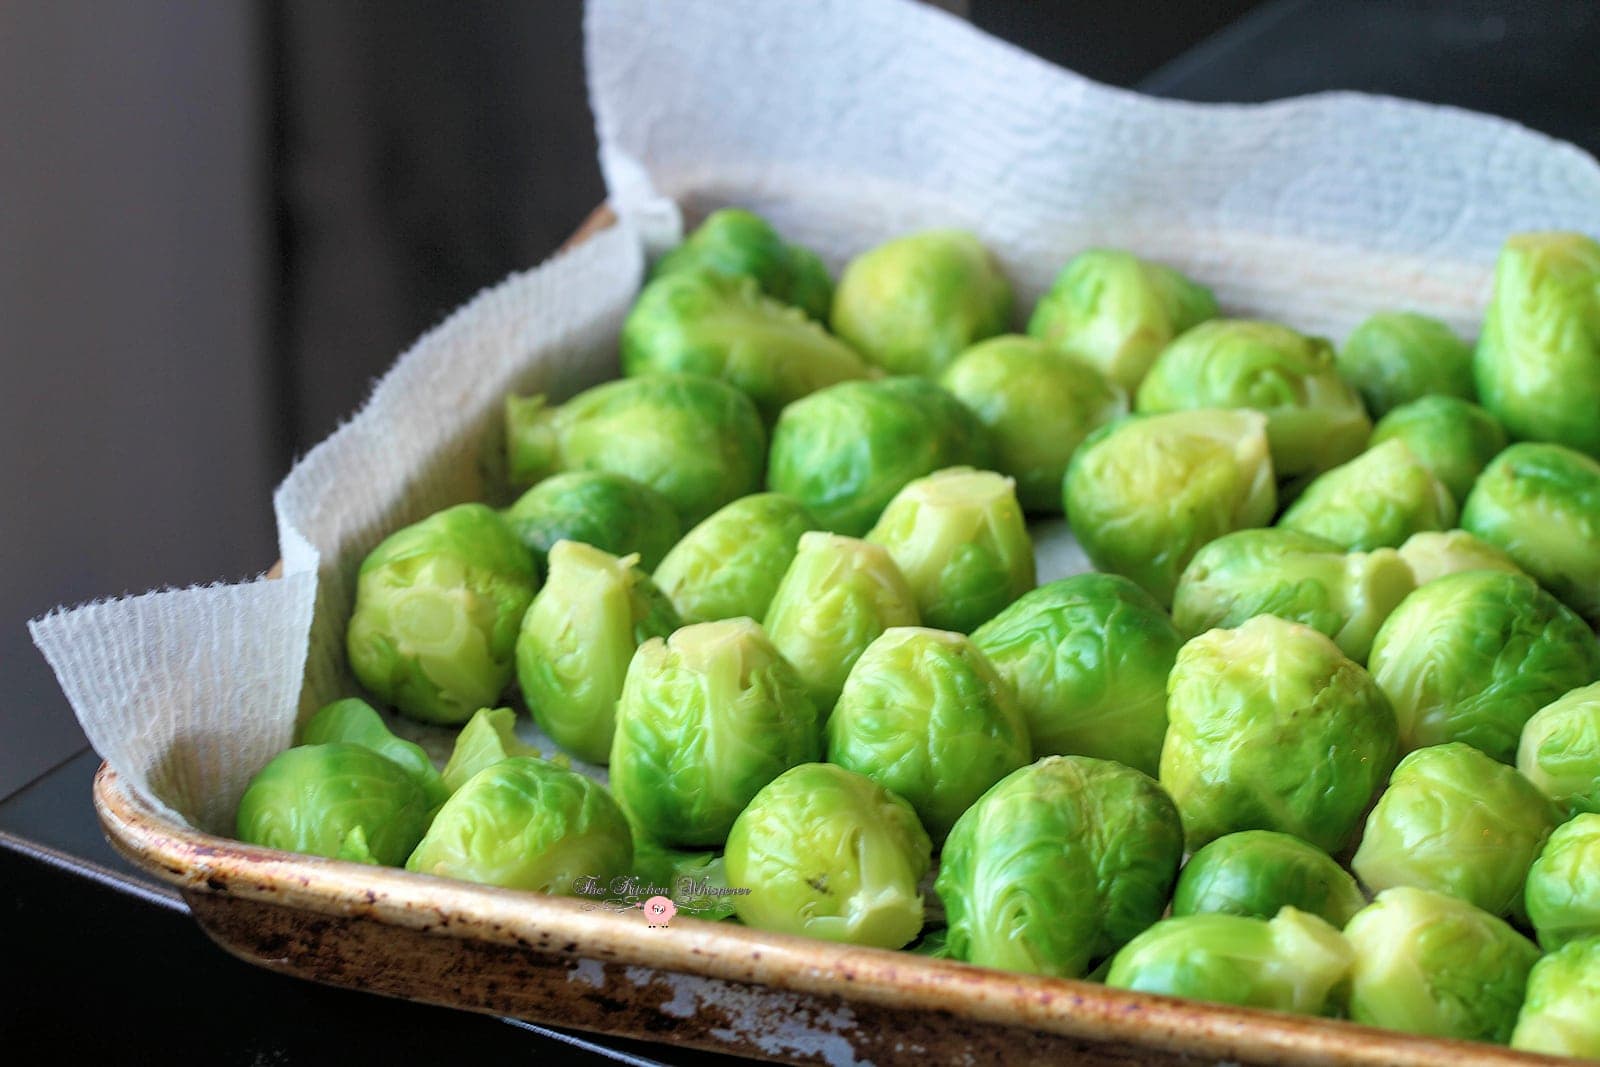 Learn how to properly freeze Brussels Sprouts